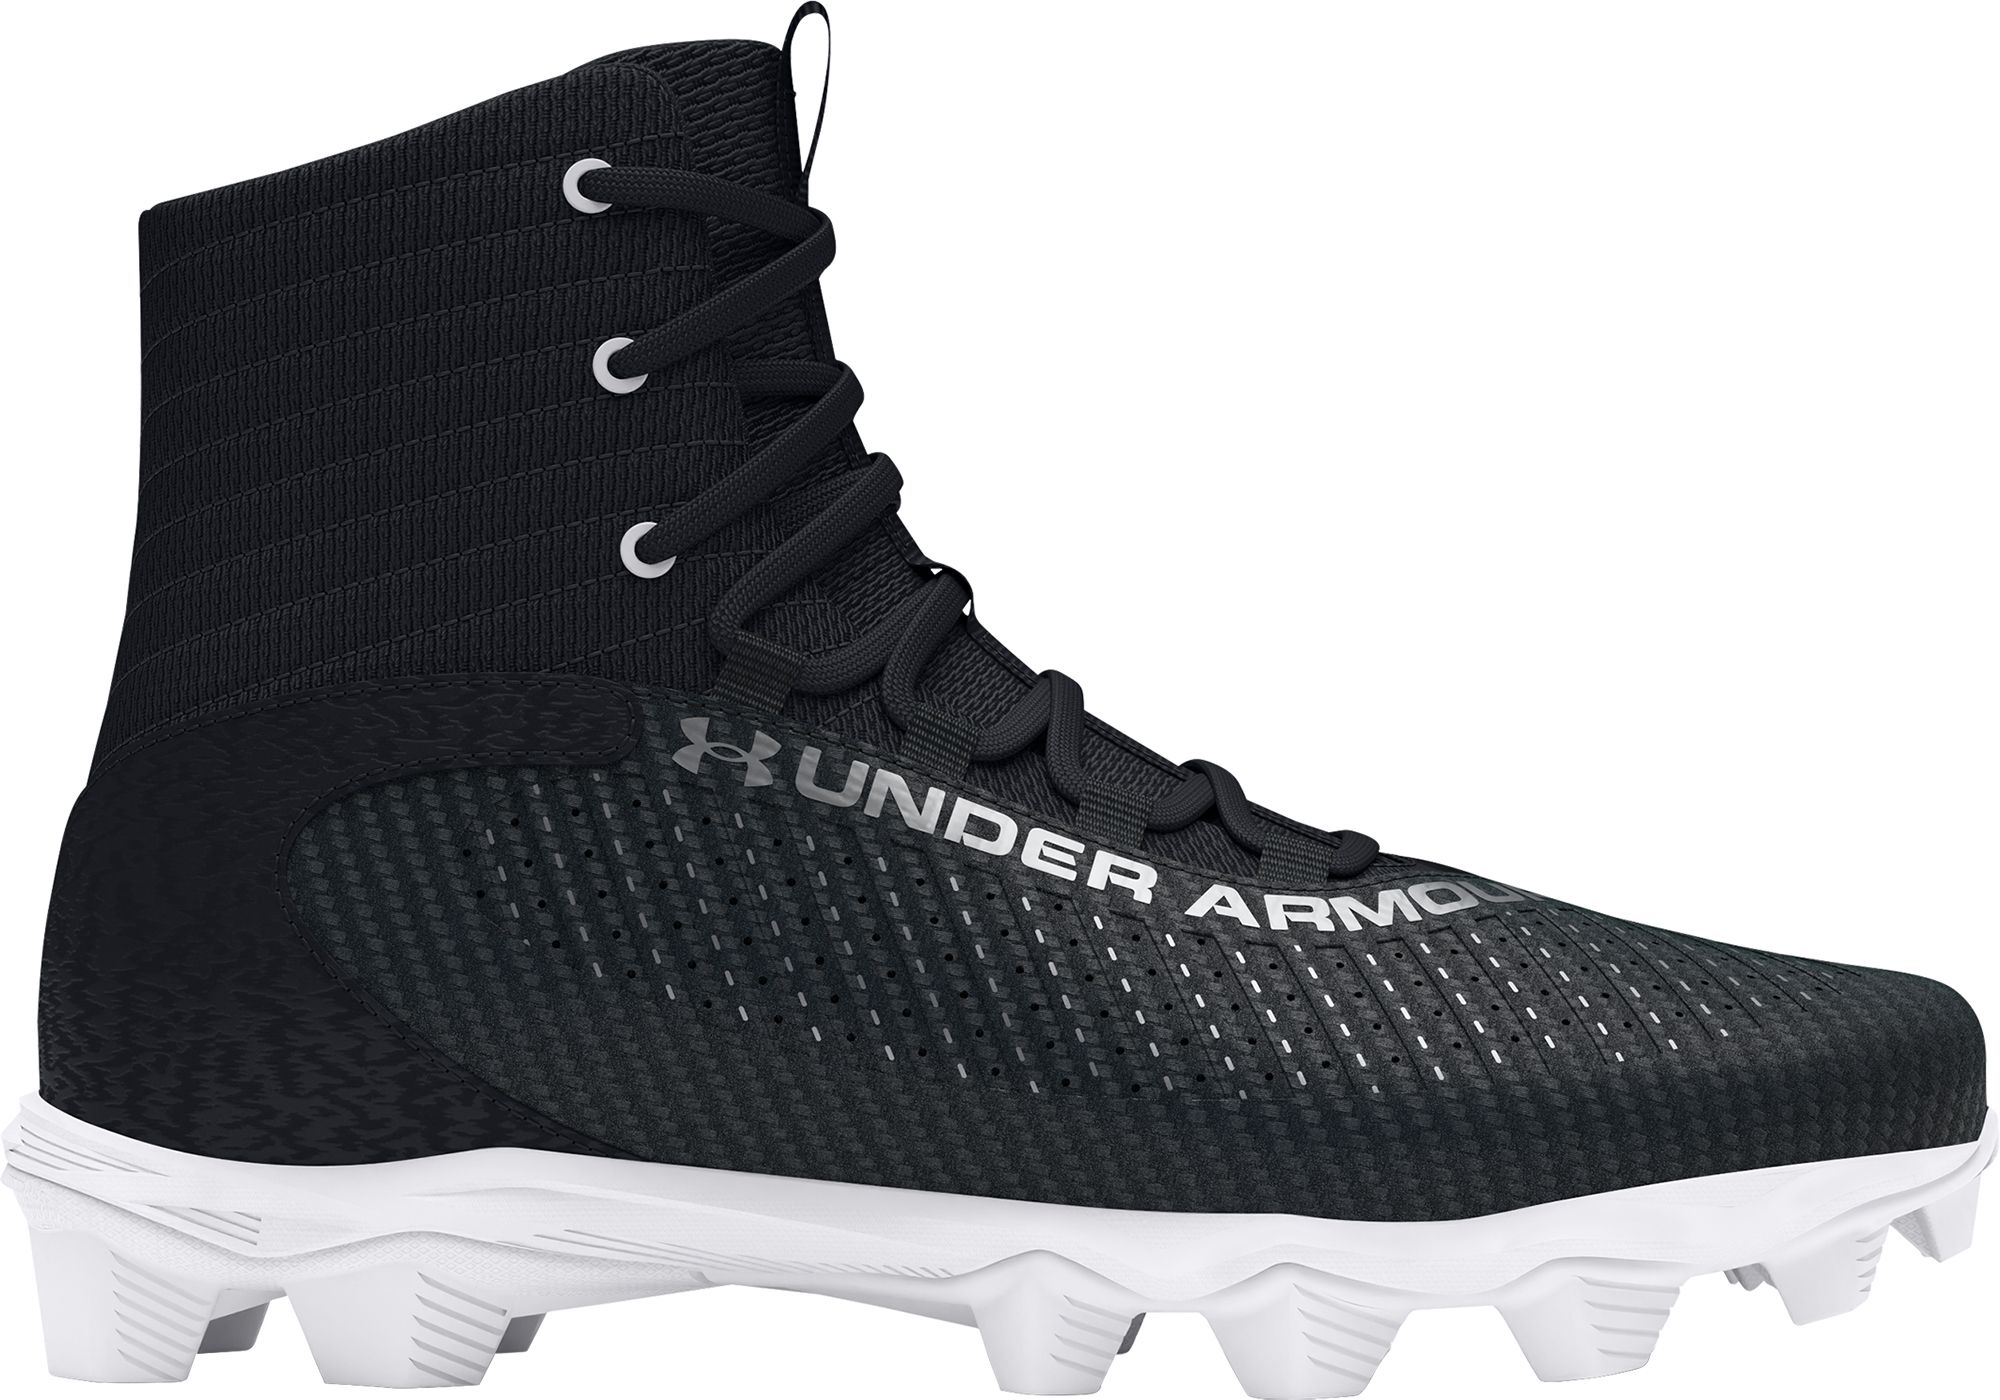 Under Armour Mens Highlight Franchise 2.0 RM Football Cleats